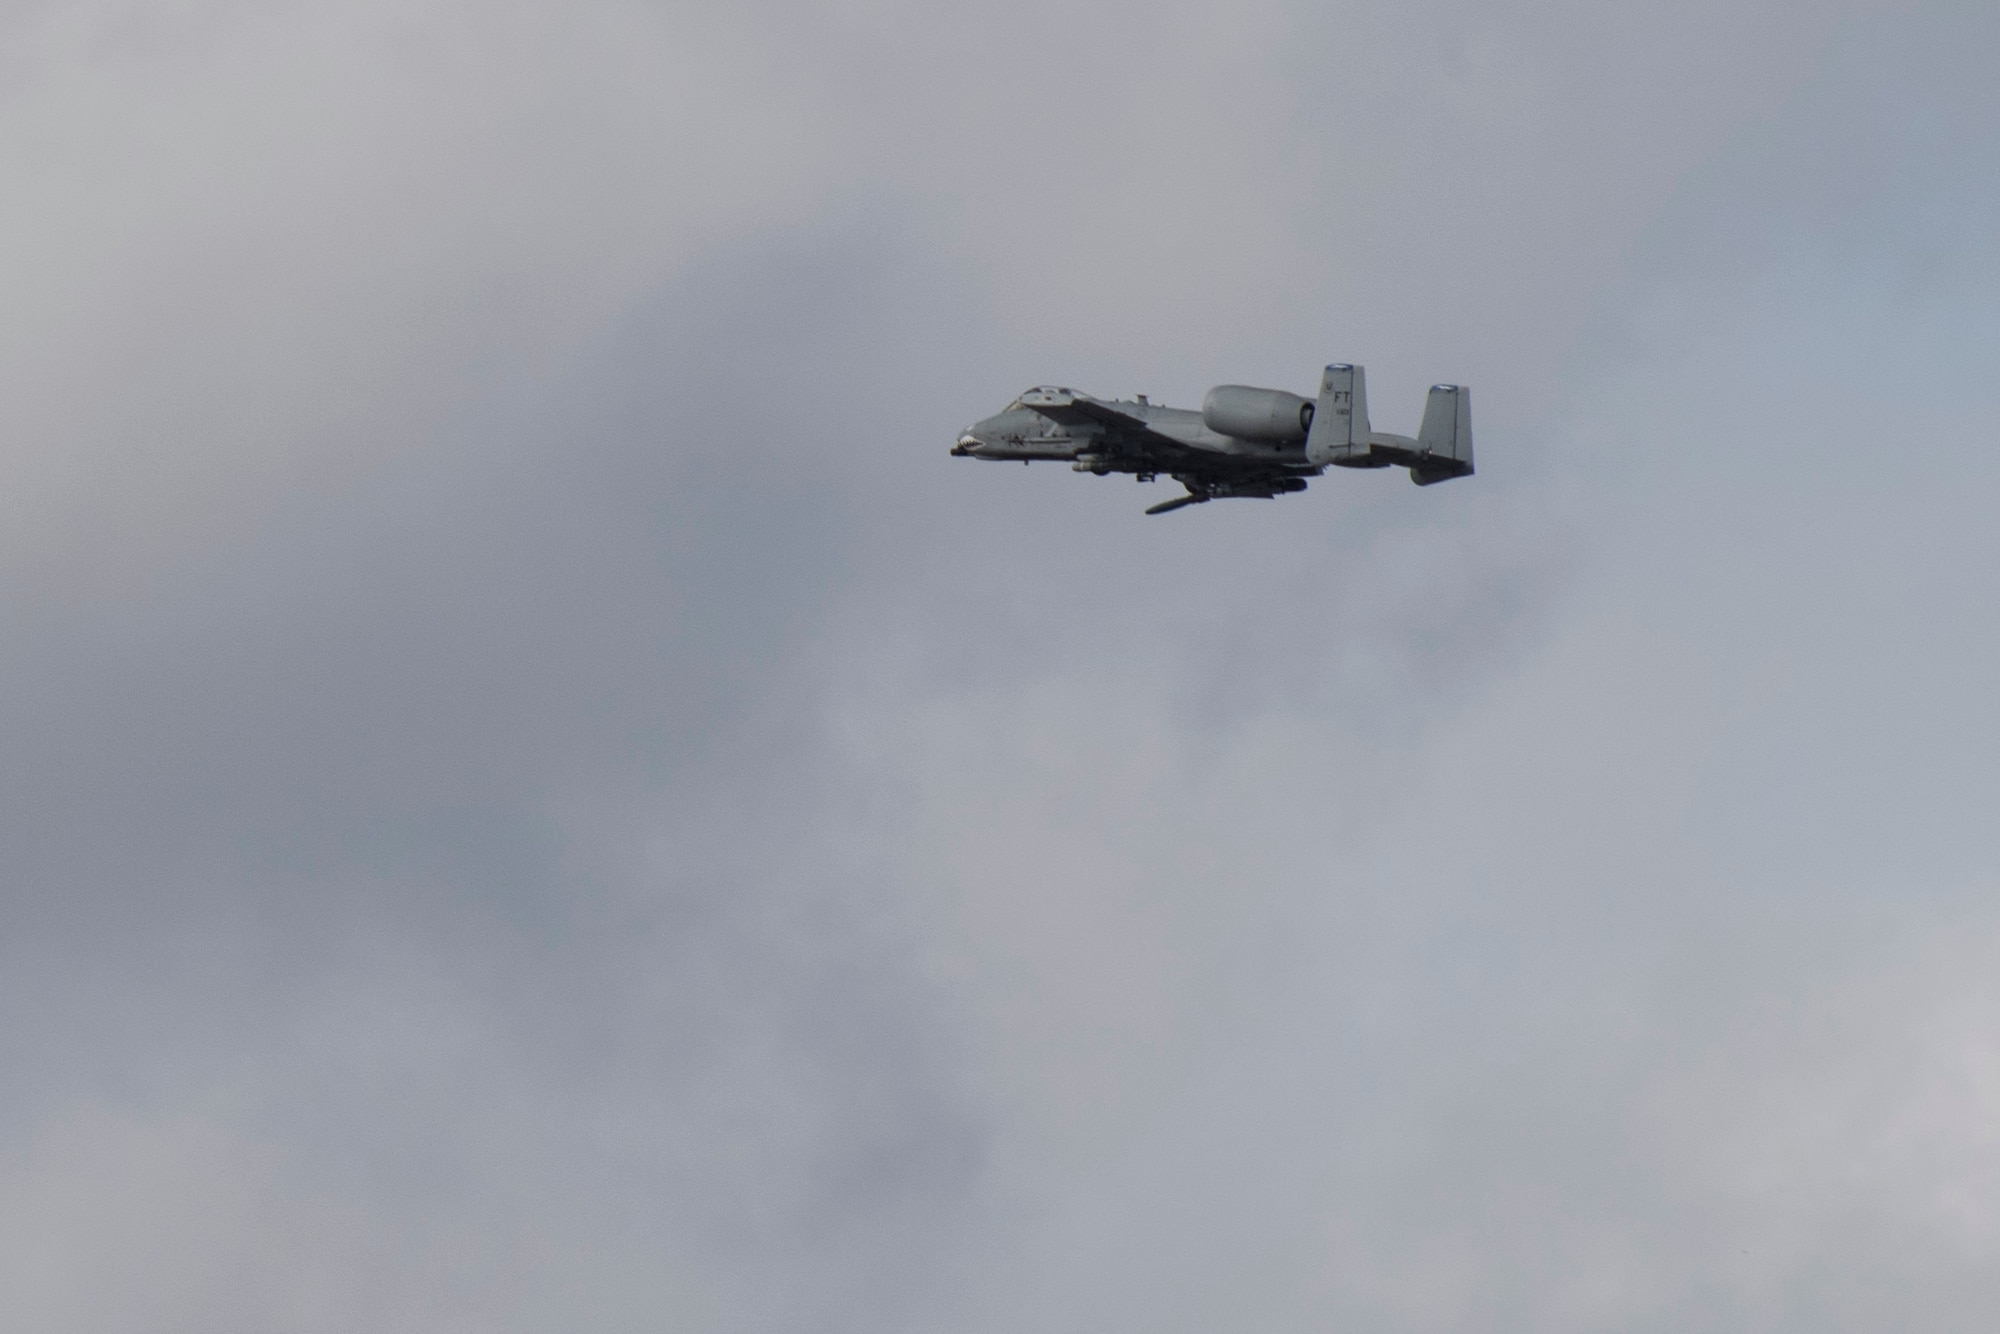 An A-10C Thunderbolt II aircraft releases an inert bomb on to a target given by ally forces during combined training, Feb. 21, 2018, at Moody Air Force Base, Ga. Ally forces from the Canadian Royal Air Force and New Zealand army traveled to Moody AFB to train with the 75th Fighter Squadron on close air support. (U.S. Air Force photo by Staff Sgt. Eric Summers Jr.)